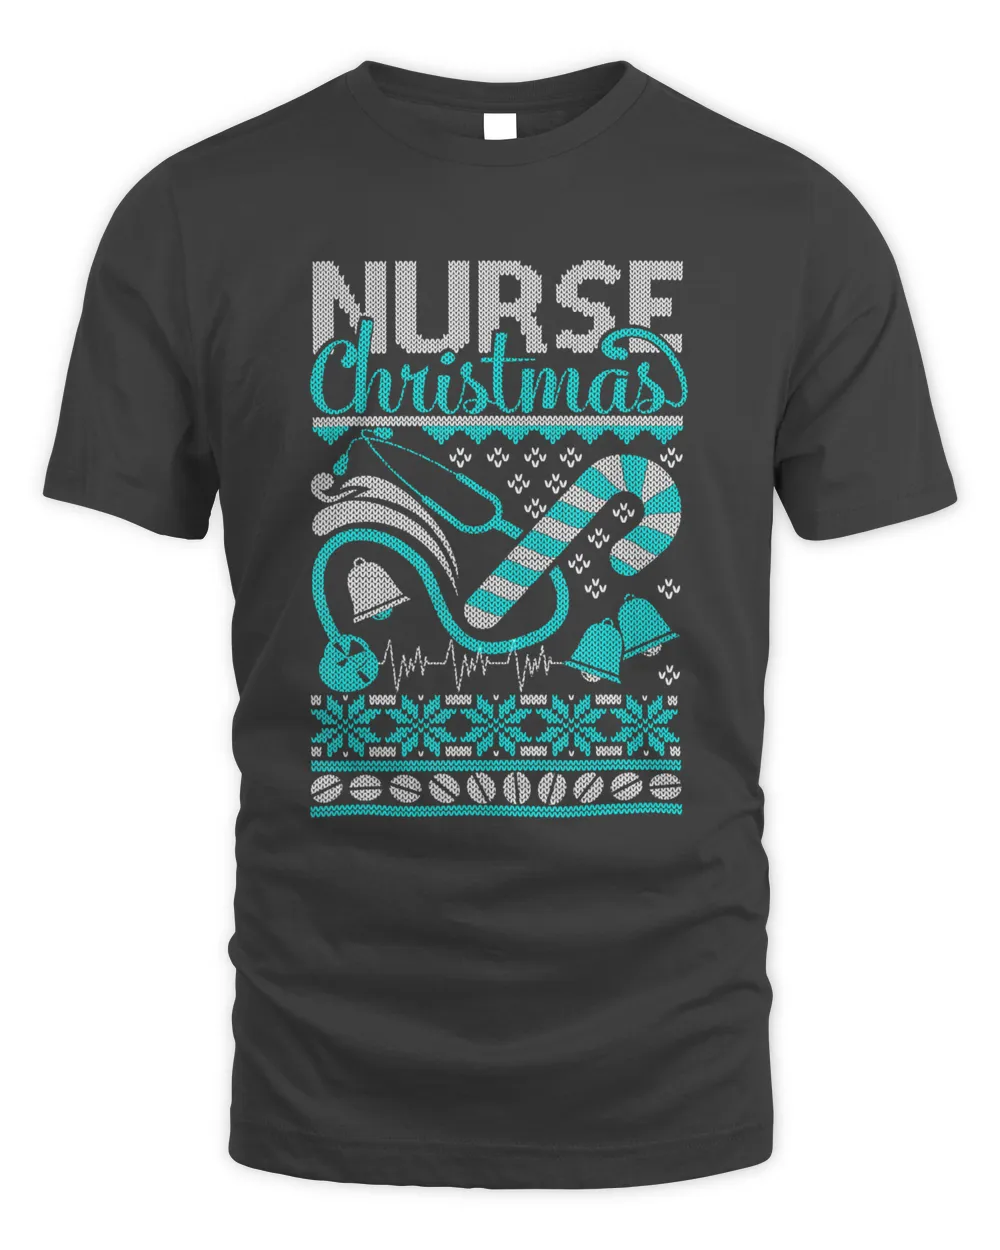 Ugly Christmas Nurse Shirt Candy Cane Holiday Party RN LPN T-Shirt